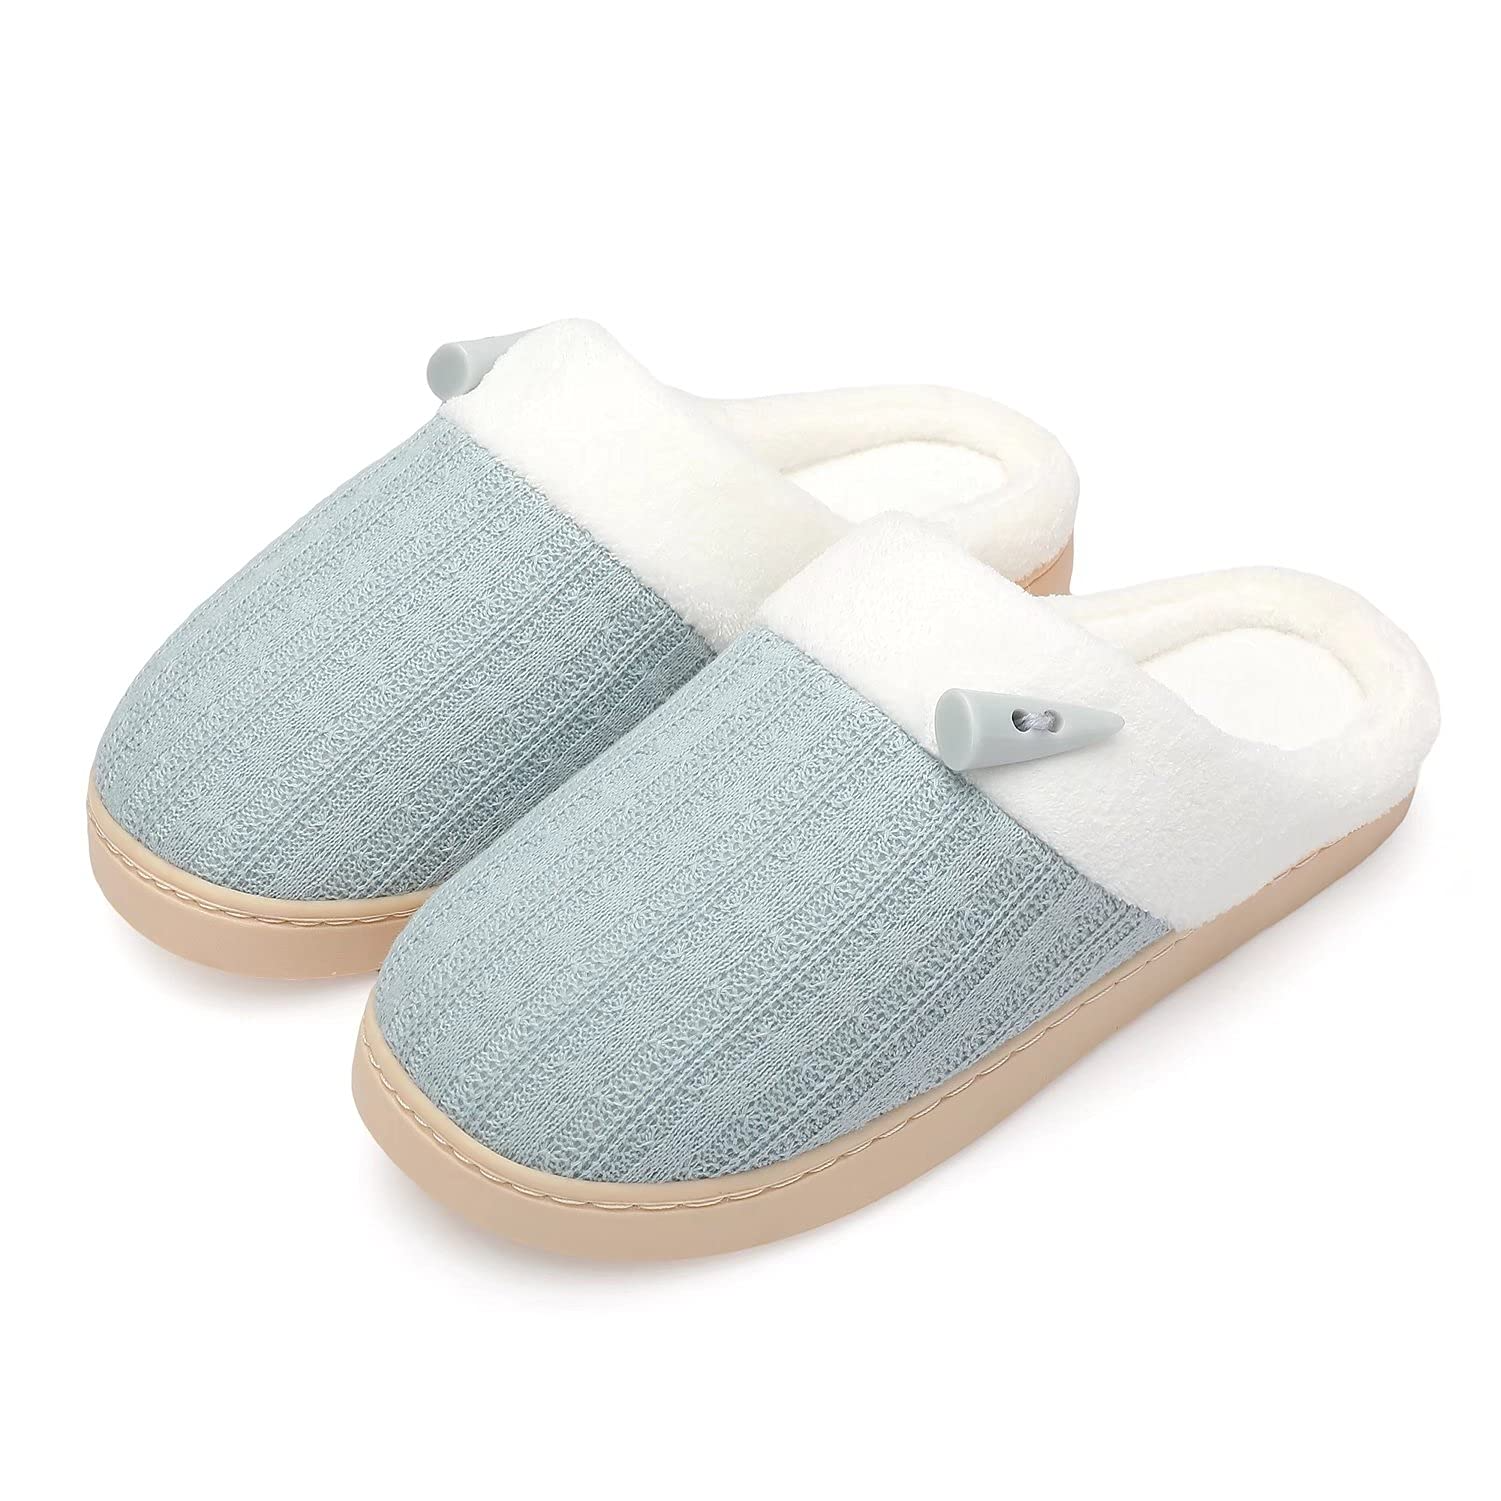 Aueoeo Womens House Slippers Soft Cotton Indoor Slippers Slip-on Memory  Foam Bedroom Slippers Home Shoes